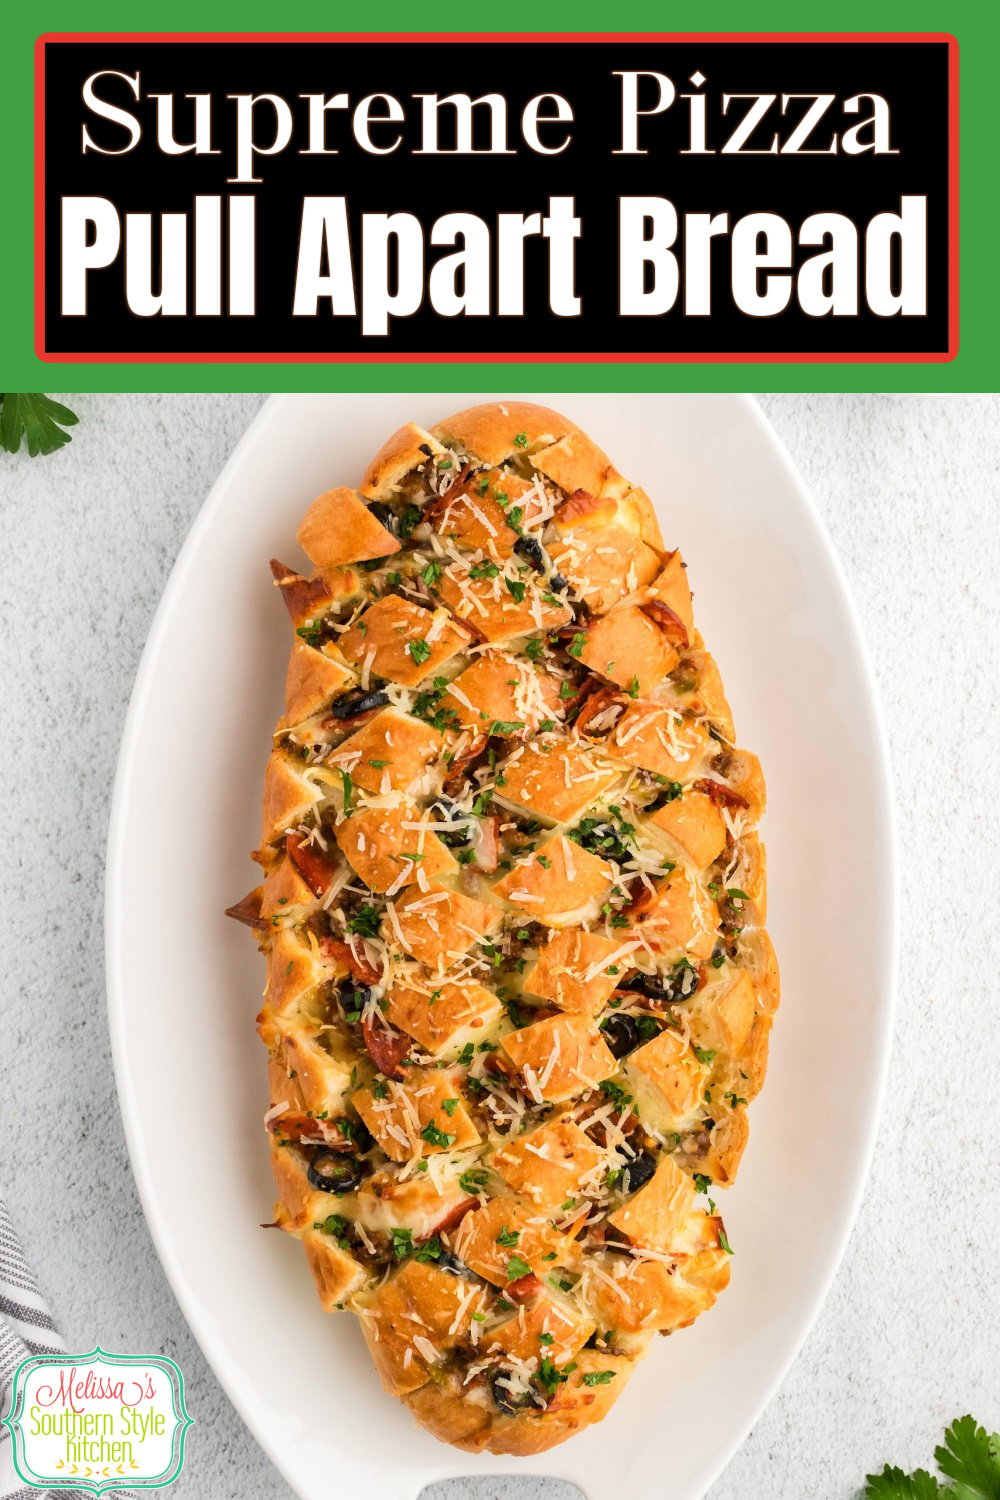 This irresistible Supreme Pizza Pull Apart Bread turns an inexpensive loaf of bread into a delicious gooey treat #pizzabread #pullapartbread #pizzarecipes #frenchbread #appetizers #superbowlparty #partyrecipes #easypizzarecipes via @melissasssk